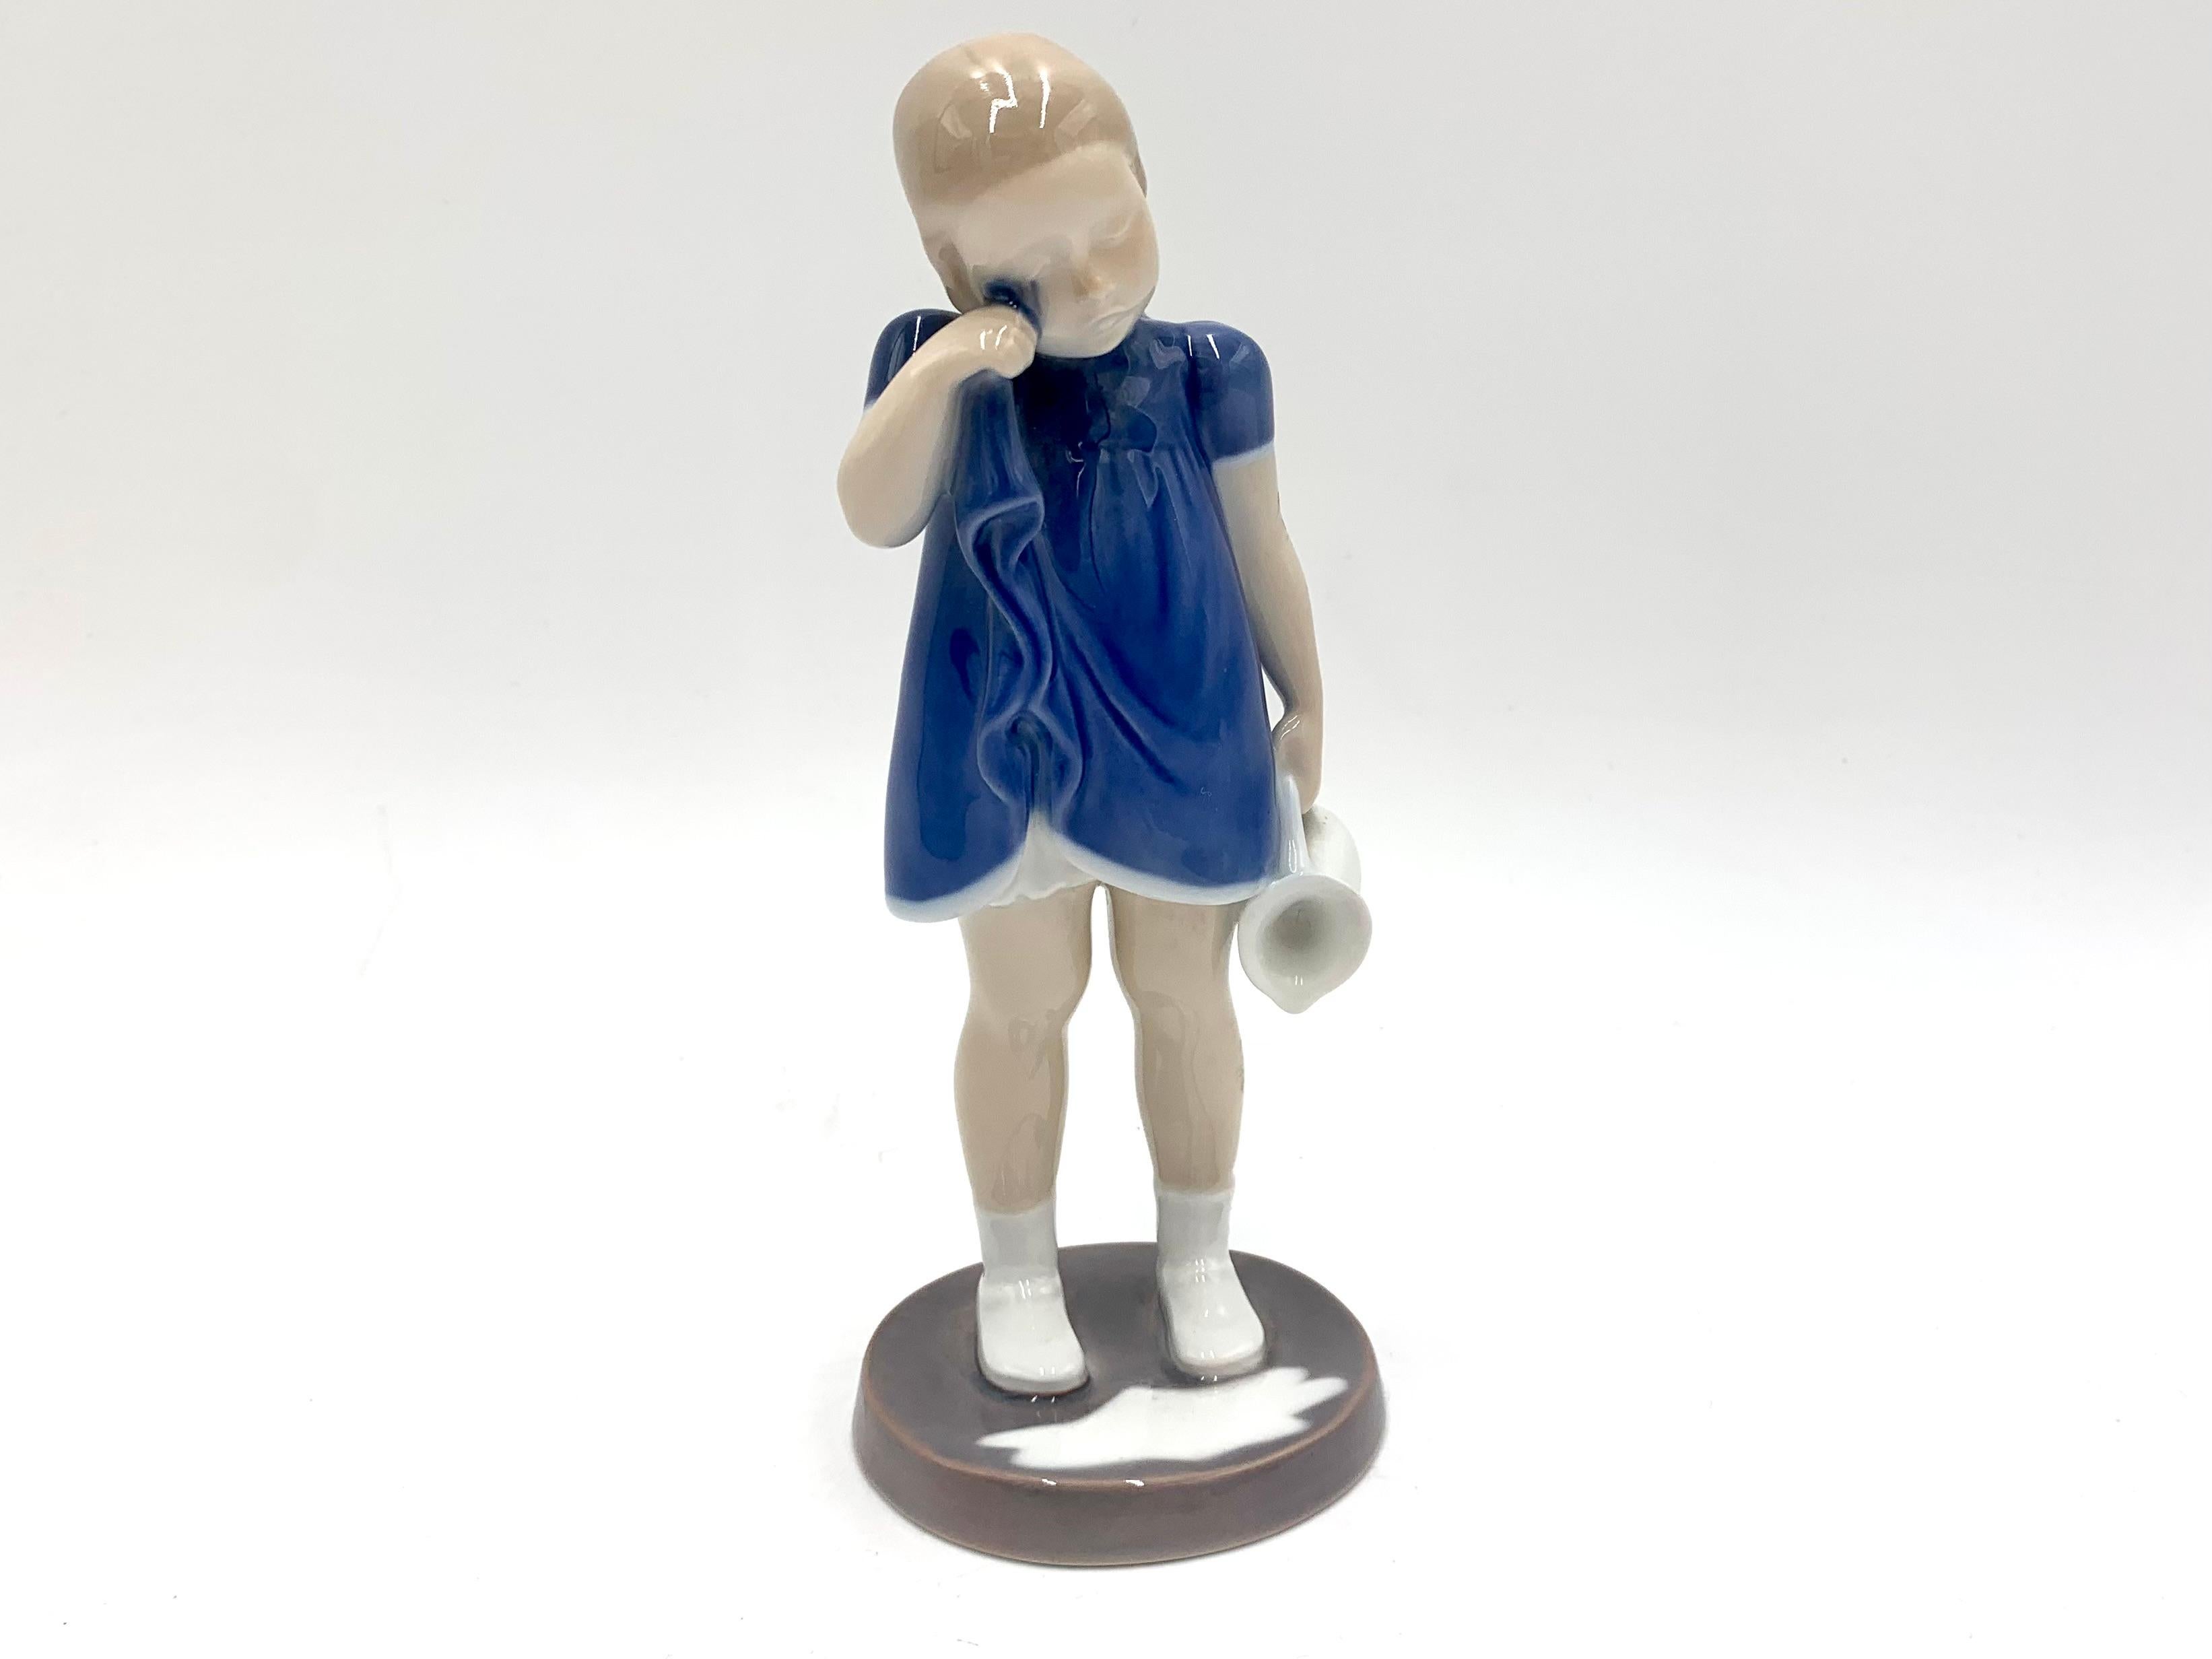 Porcelain figurine of a crying girl over spilled milk

Made in Denmark by Bing & Grondahl

Produced in 1950-1965

Very good condition, no damage

Measures: height 17cm width 7cm depth 6cm.